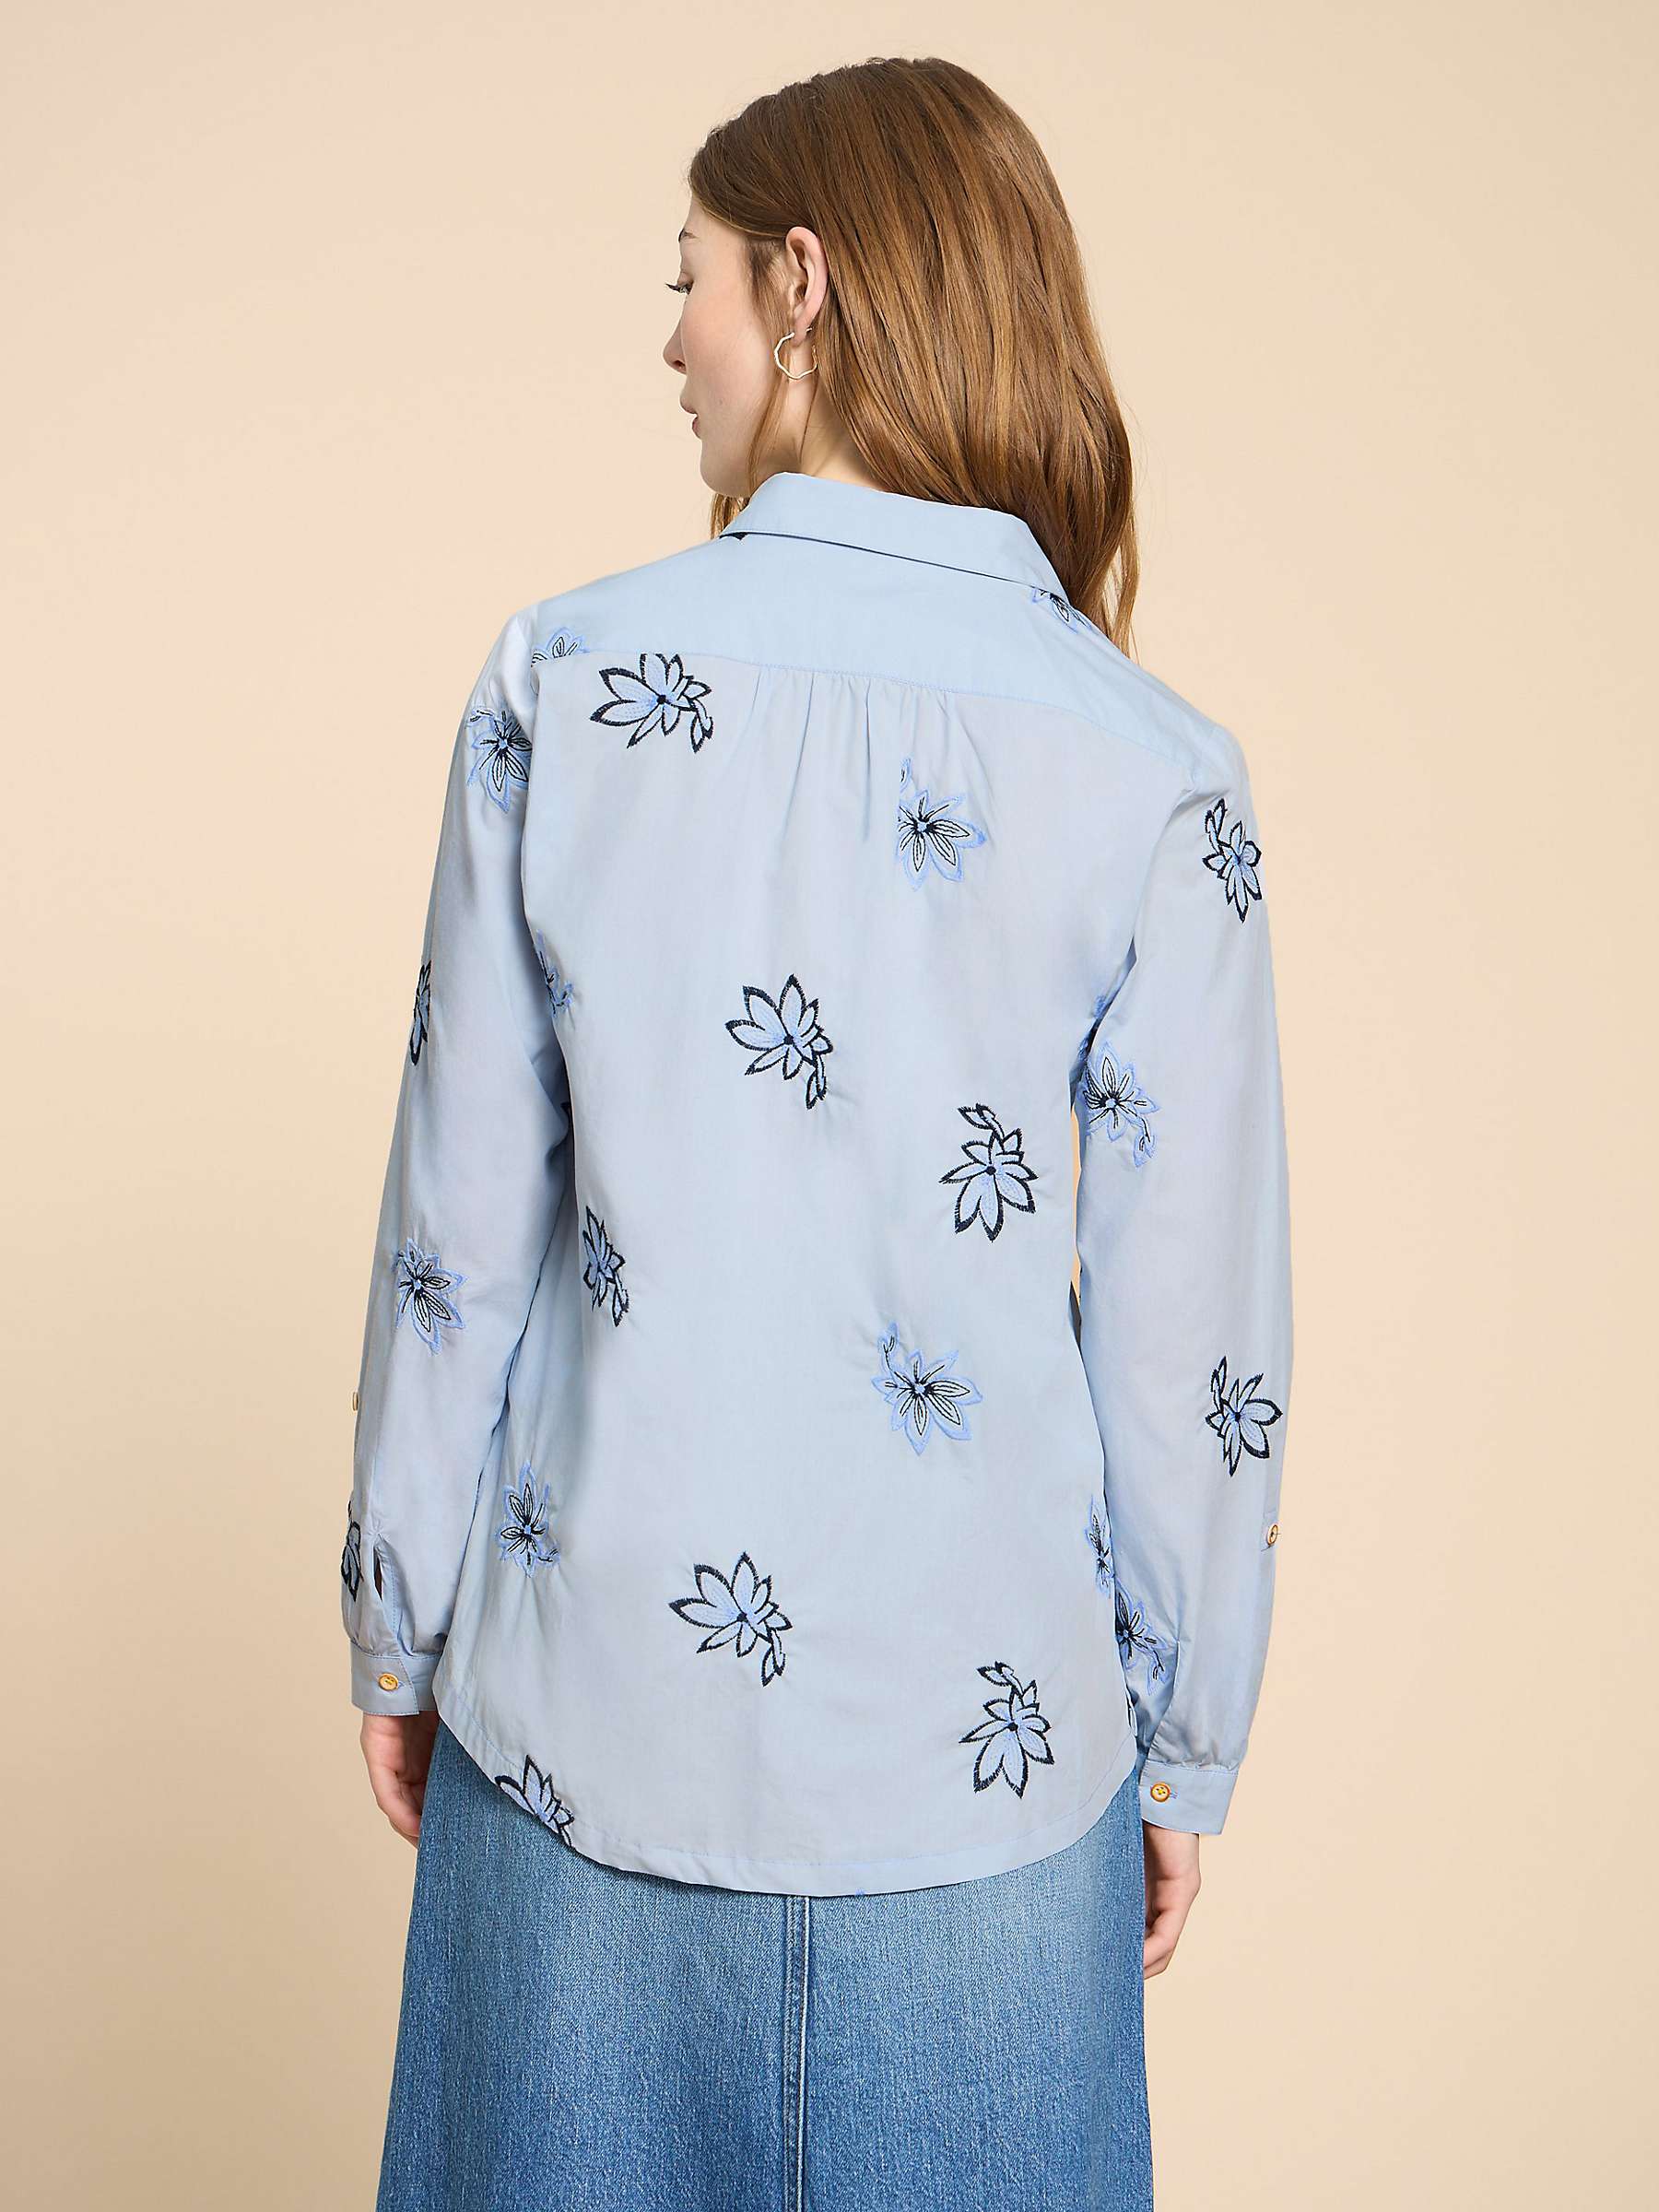 Buy White Stuff Sophie Cotton Embroidered Shirt, Blue Online at johnlewis.com